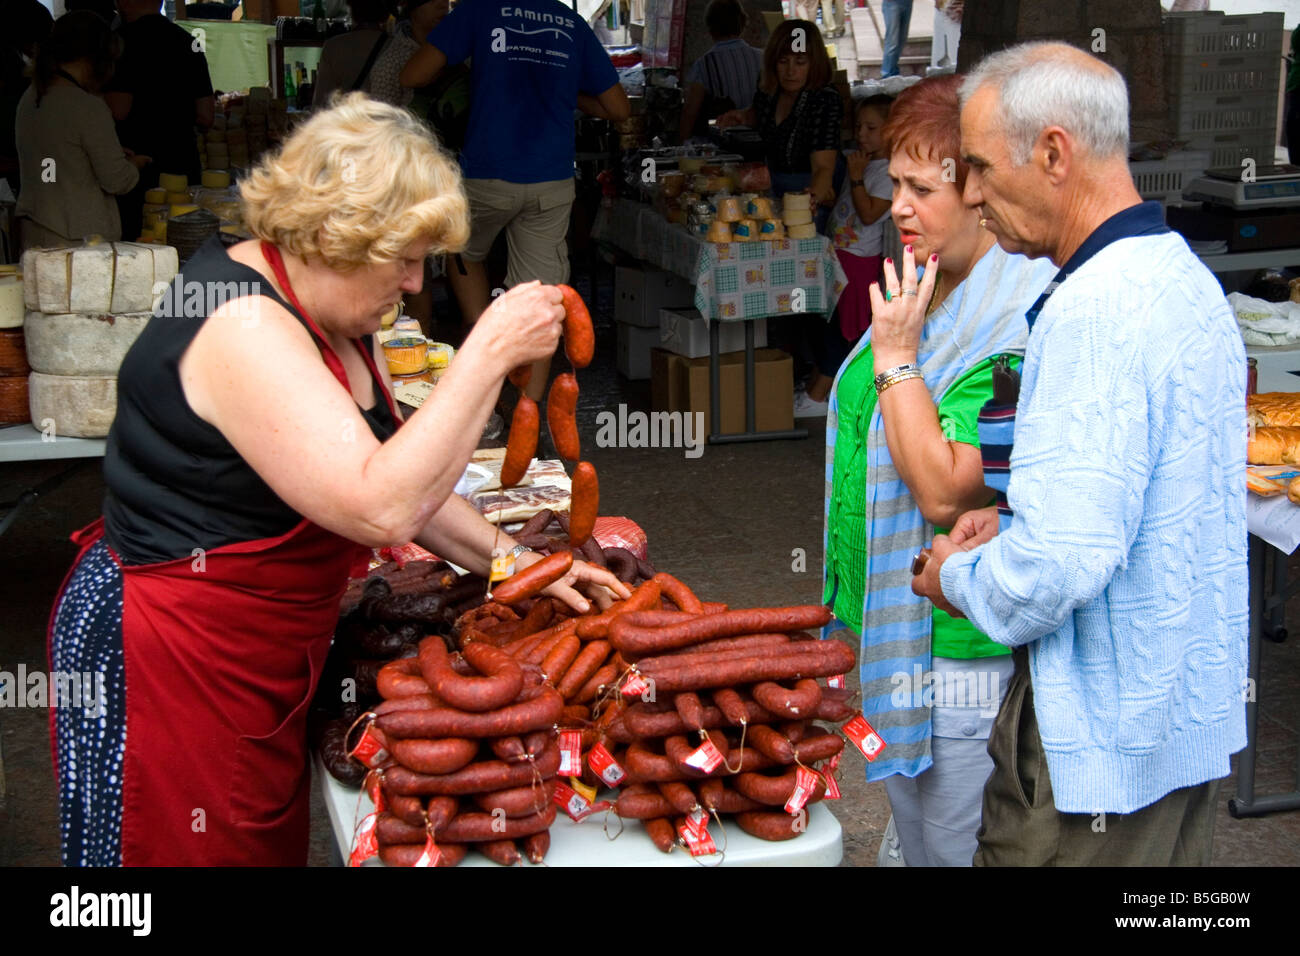 Vendor selling sausage at an outdoor market in the town on Cangas de Onis Asturias northern Spain Stock Photo